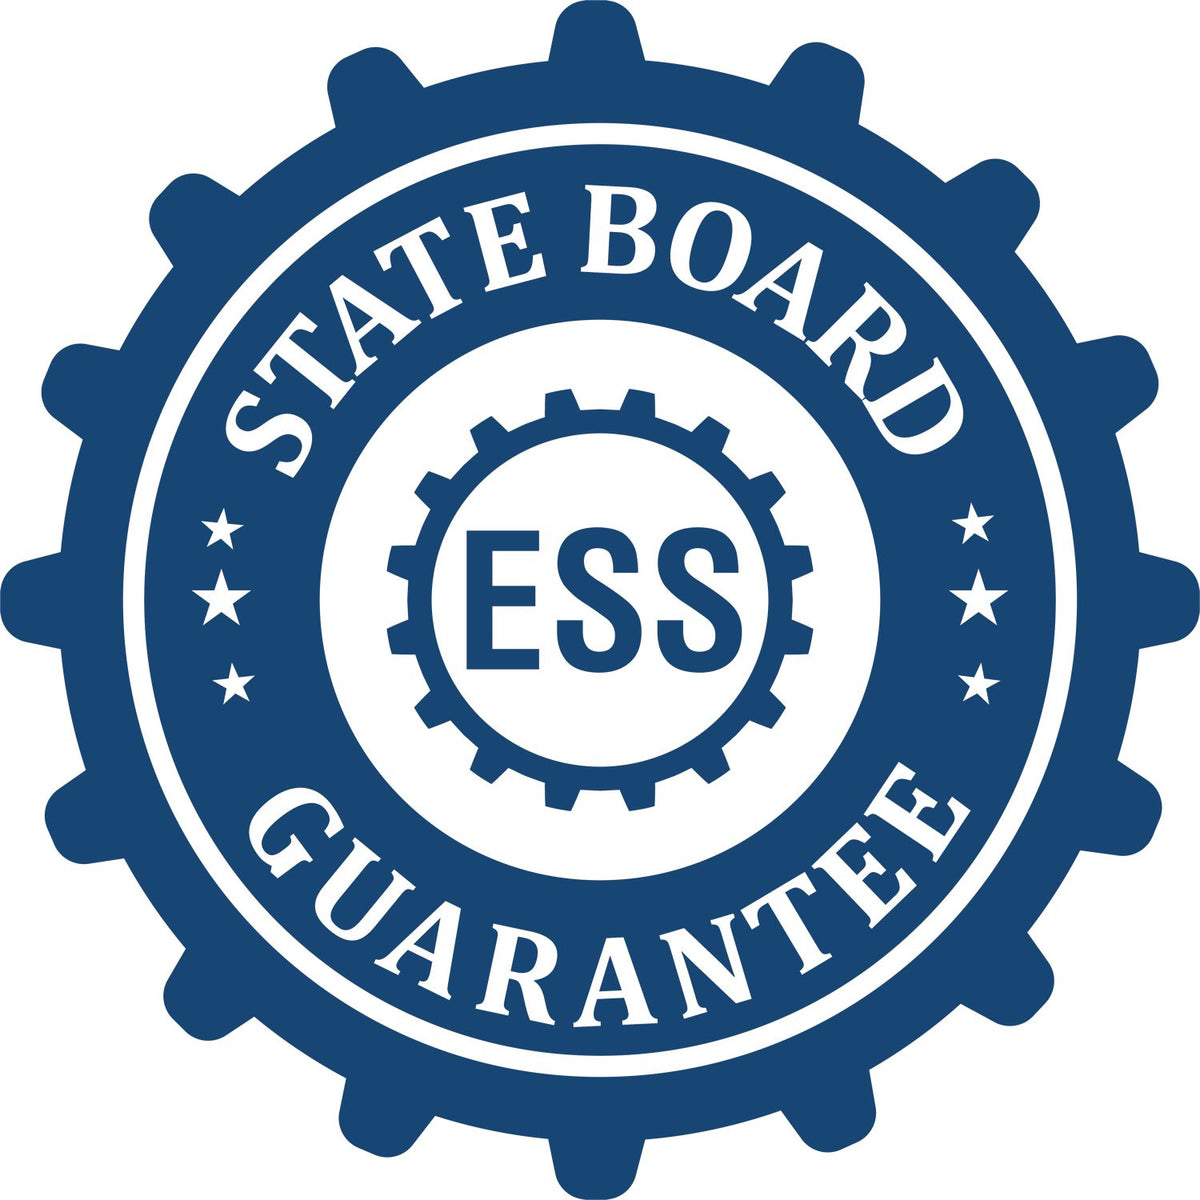 An emblem in a gear shape illustrating a state board guarantee for the Digital New York PE Stamp and Electronic Seal for New York Engineer product.